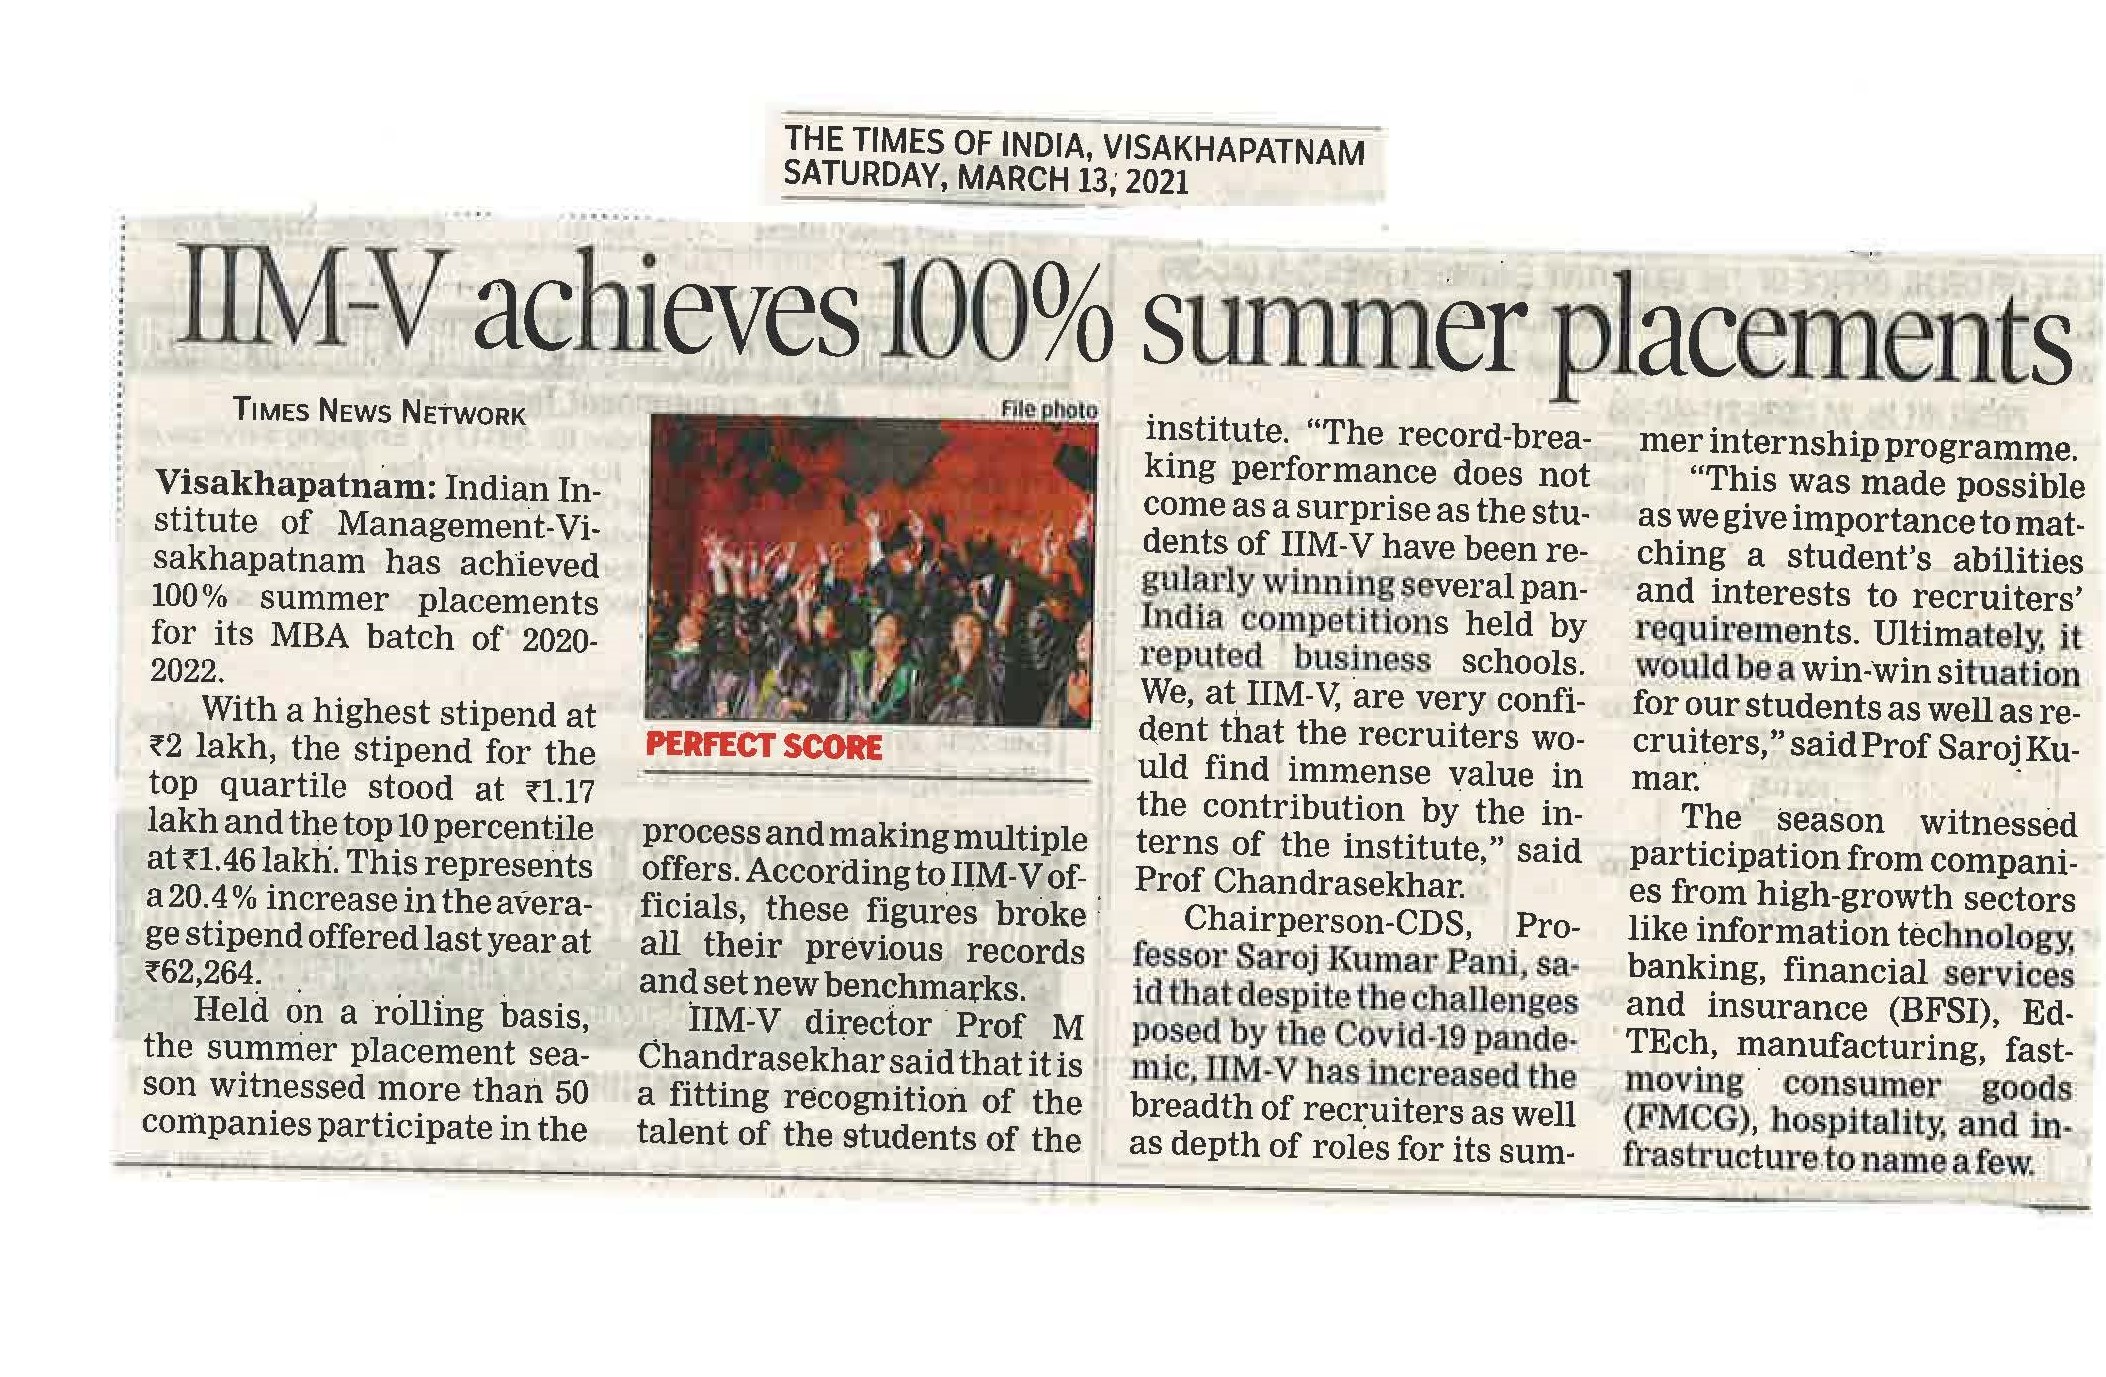 IIMV achieves 100 percent summer placements - 13.03.2021